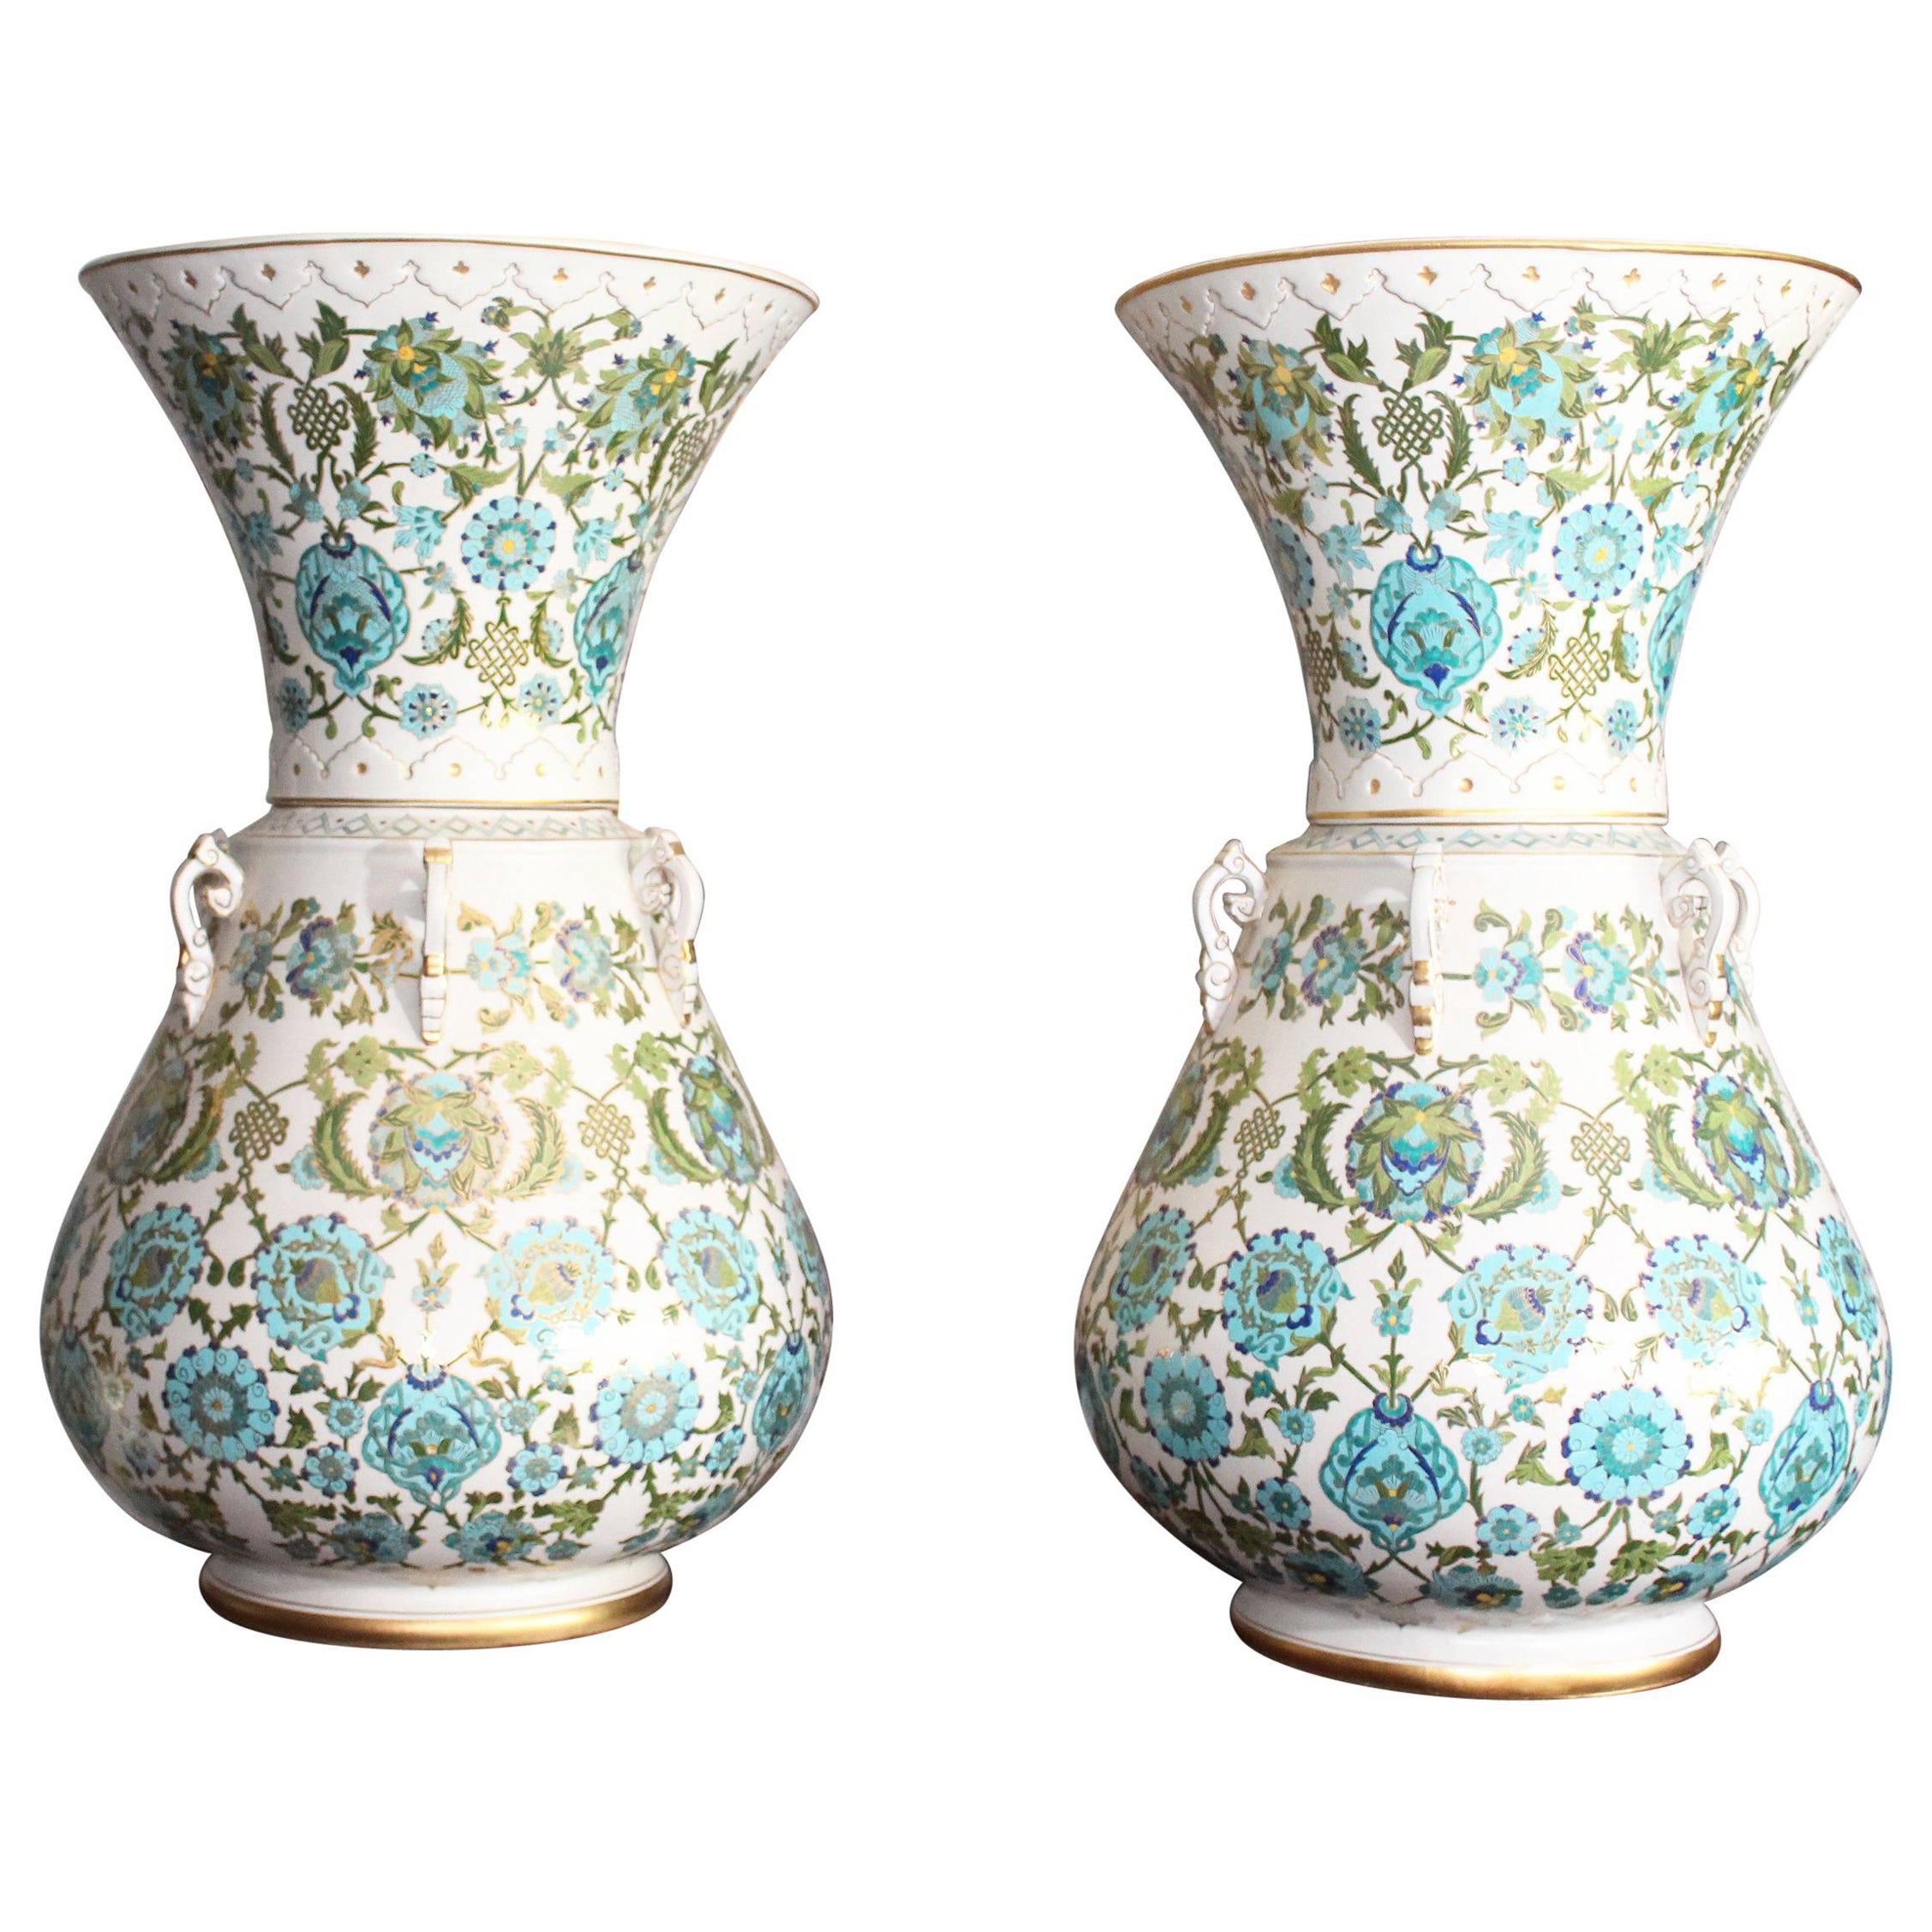 Pair of Mosque Porcelain Lamps with Gilded and Enameled Floral Patterns